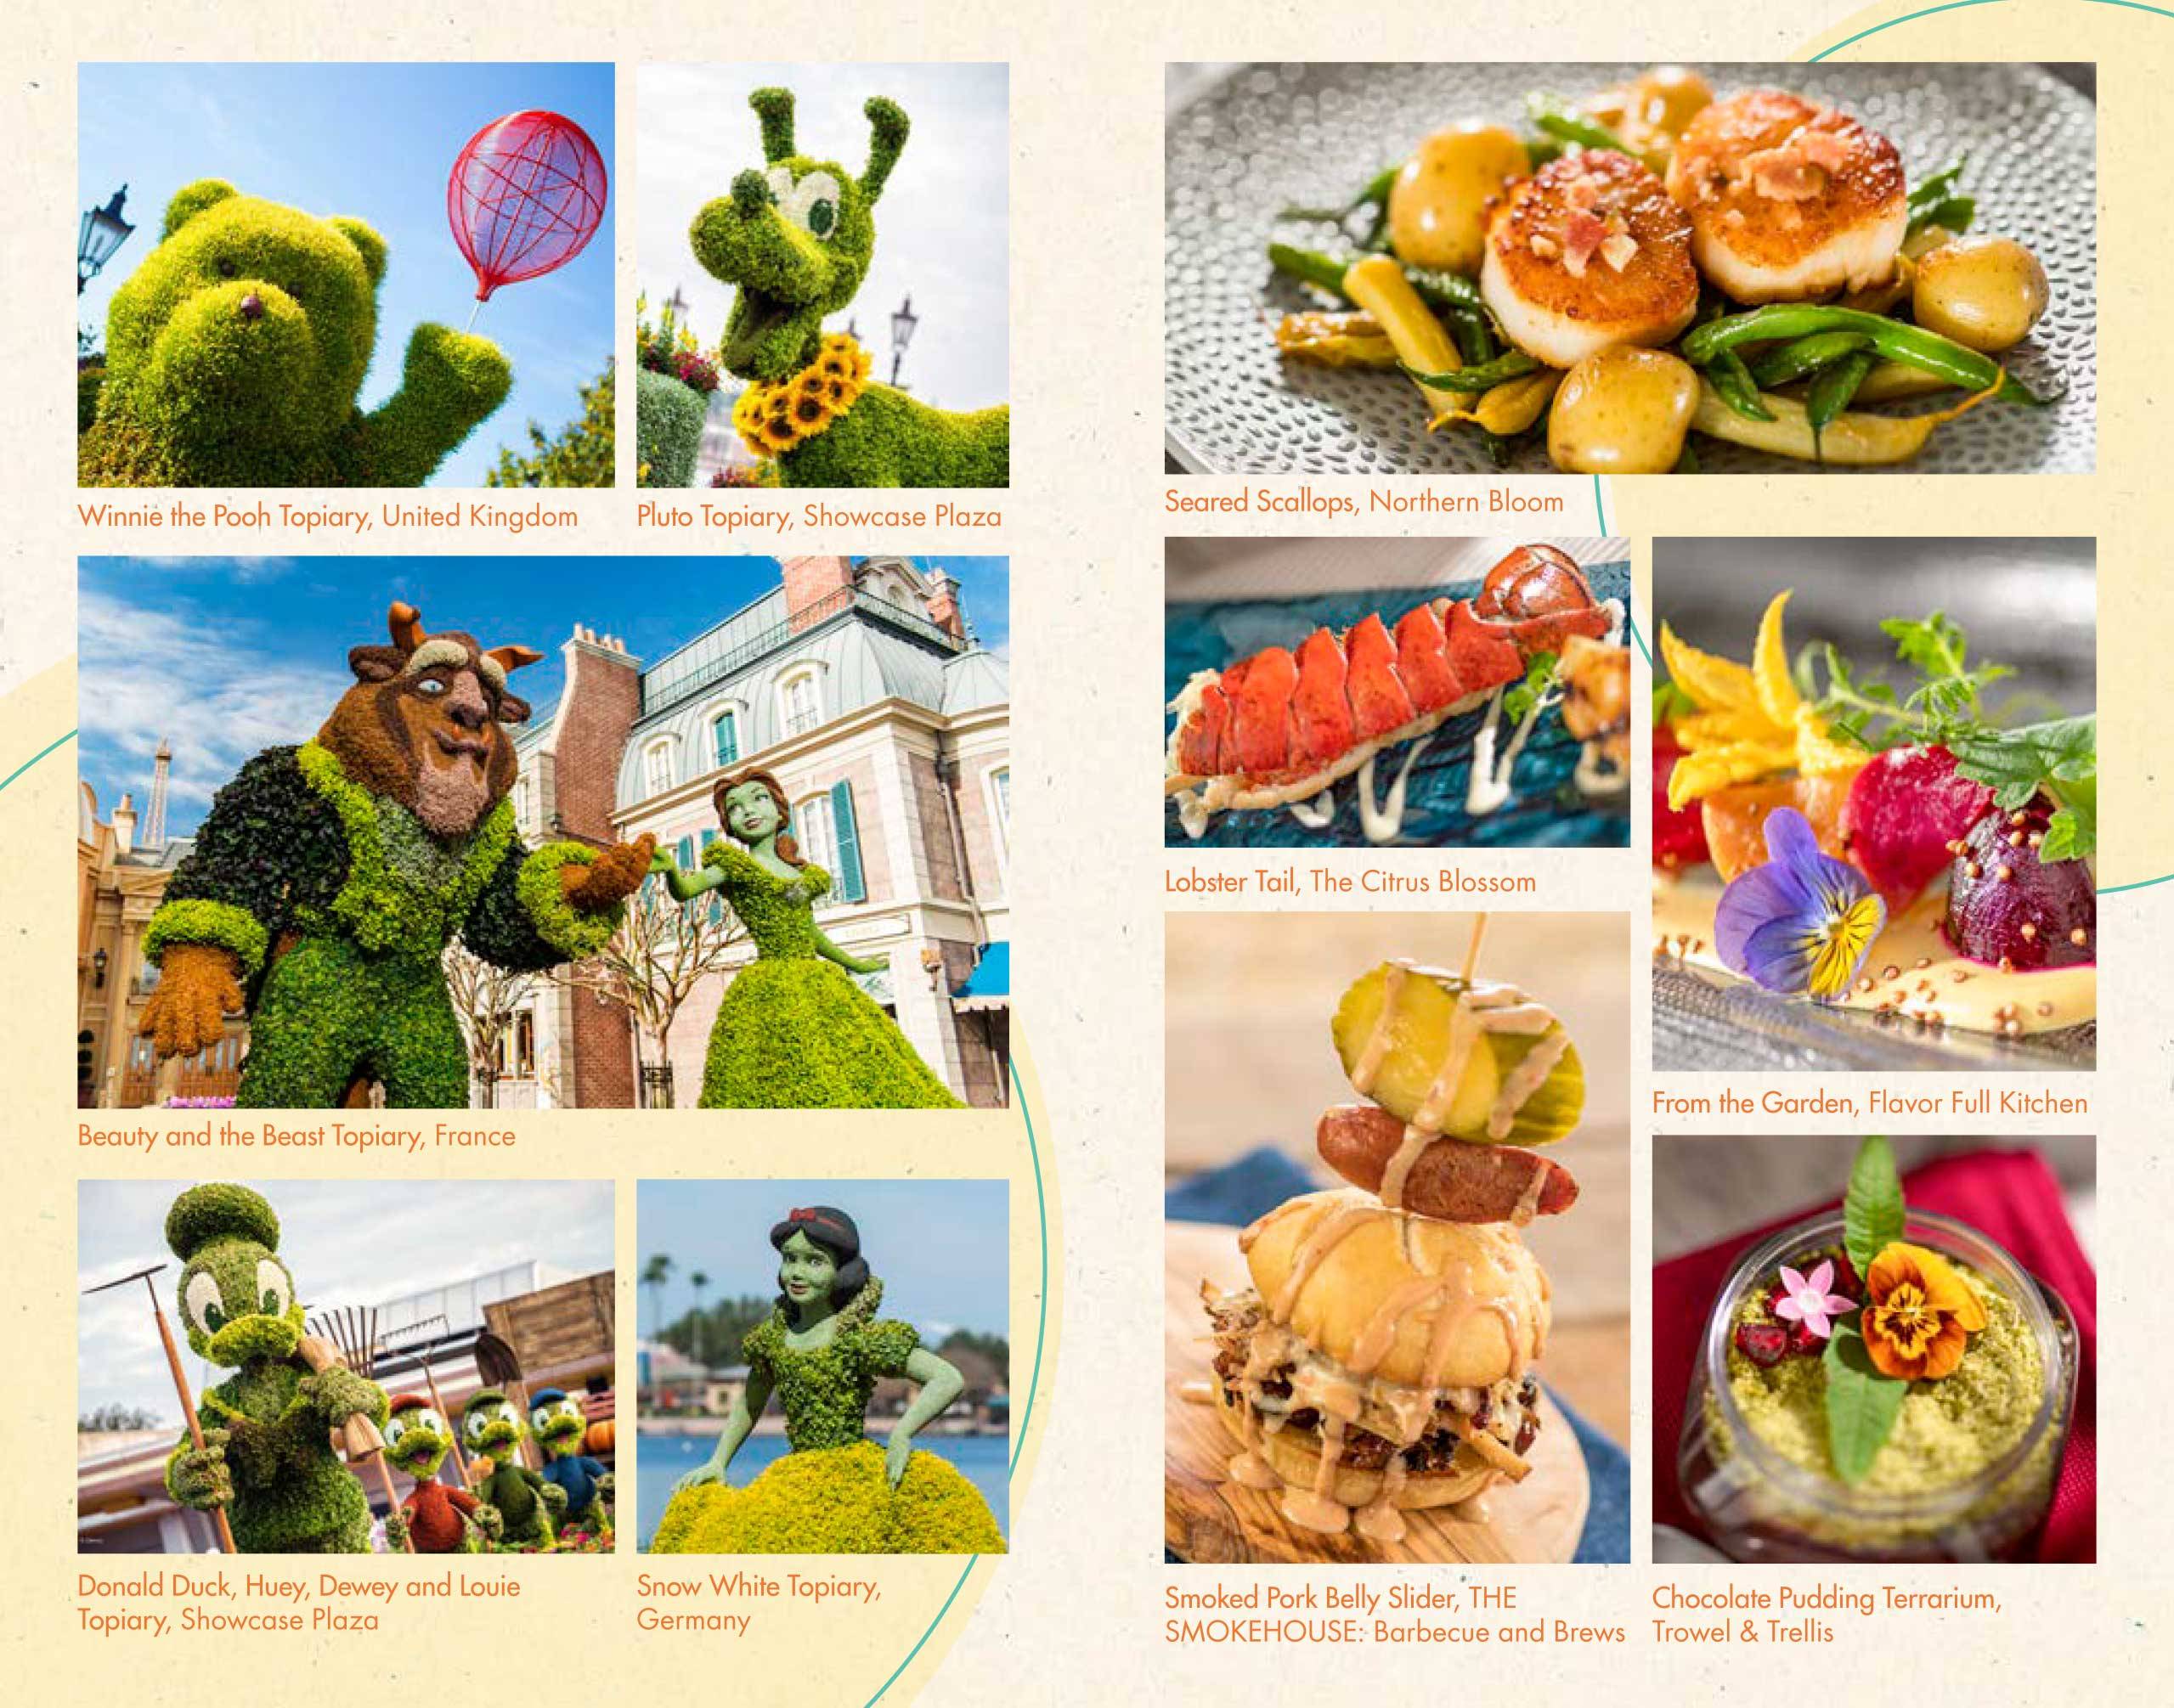 PHOTOS - Times guide and Festival Passport for the 2019 Epcot International Flower and Garden Festival